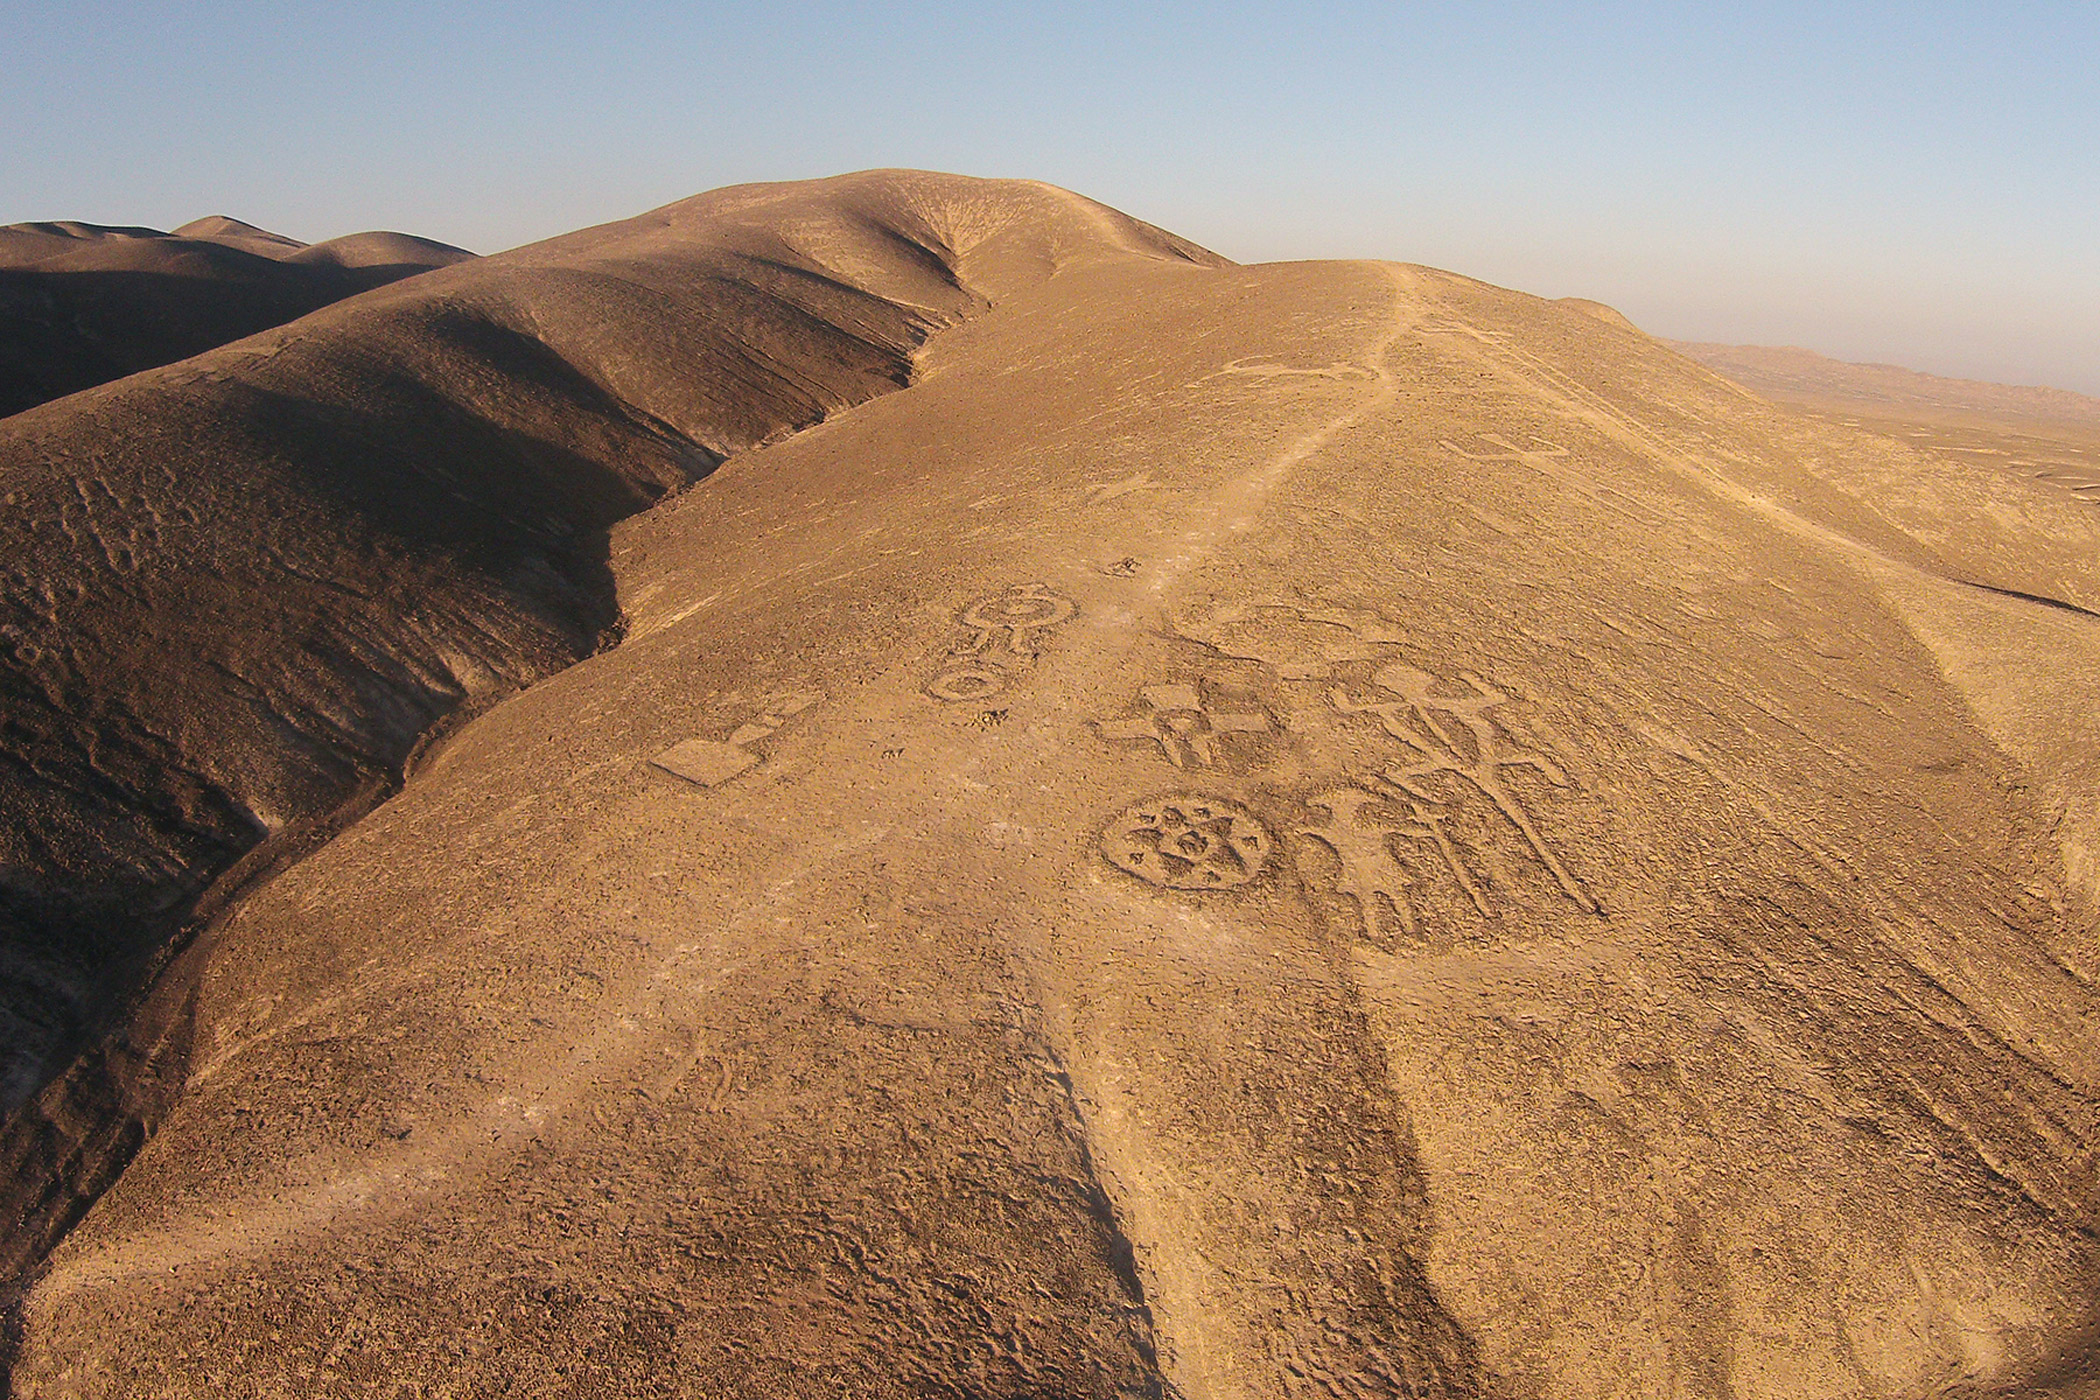 The Chug-Chug Geoglyphs are located along an ancient caravan route that connected two oases, the Calama and Quillagua